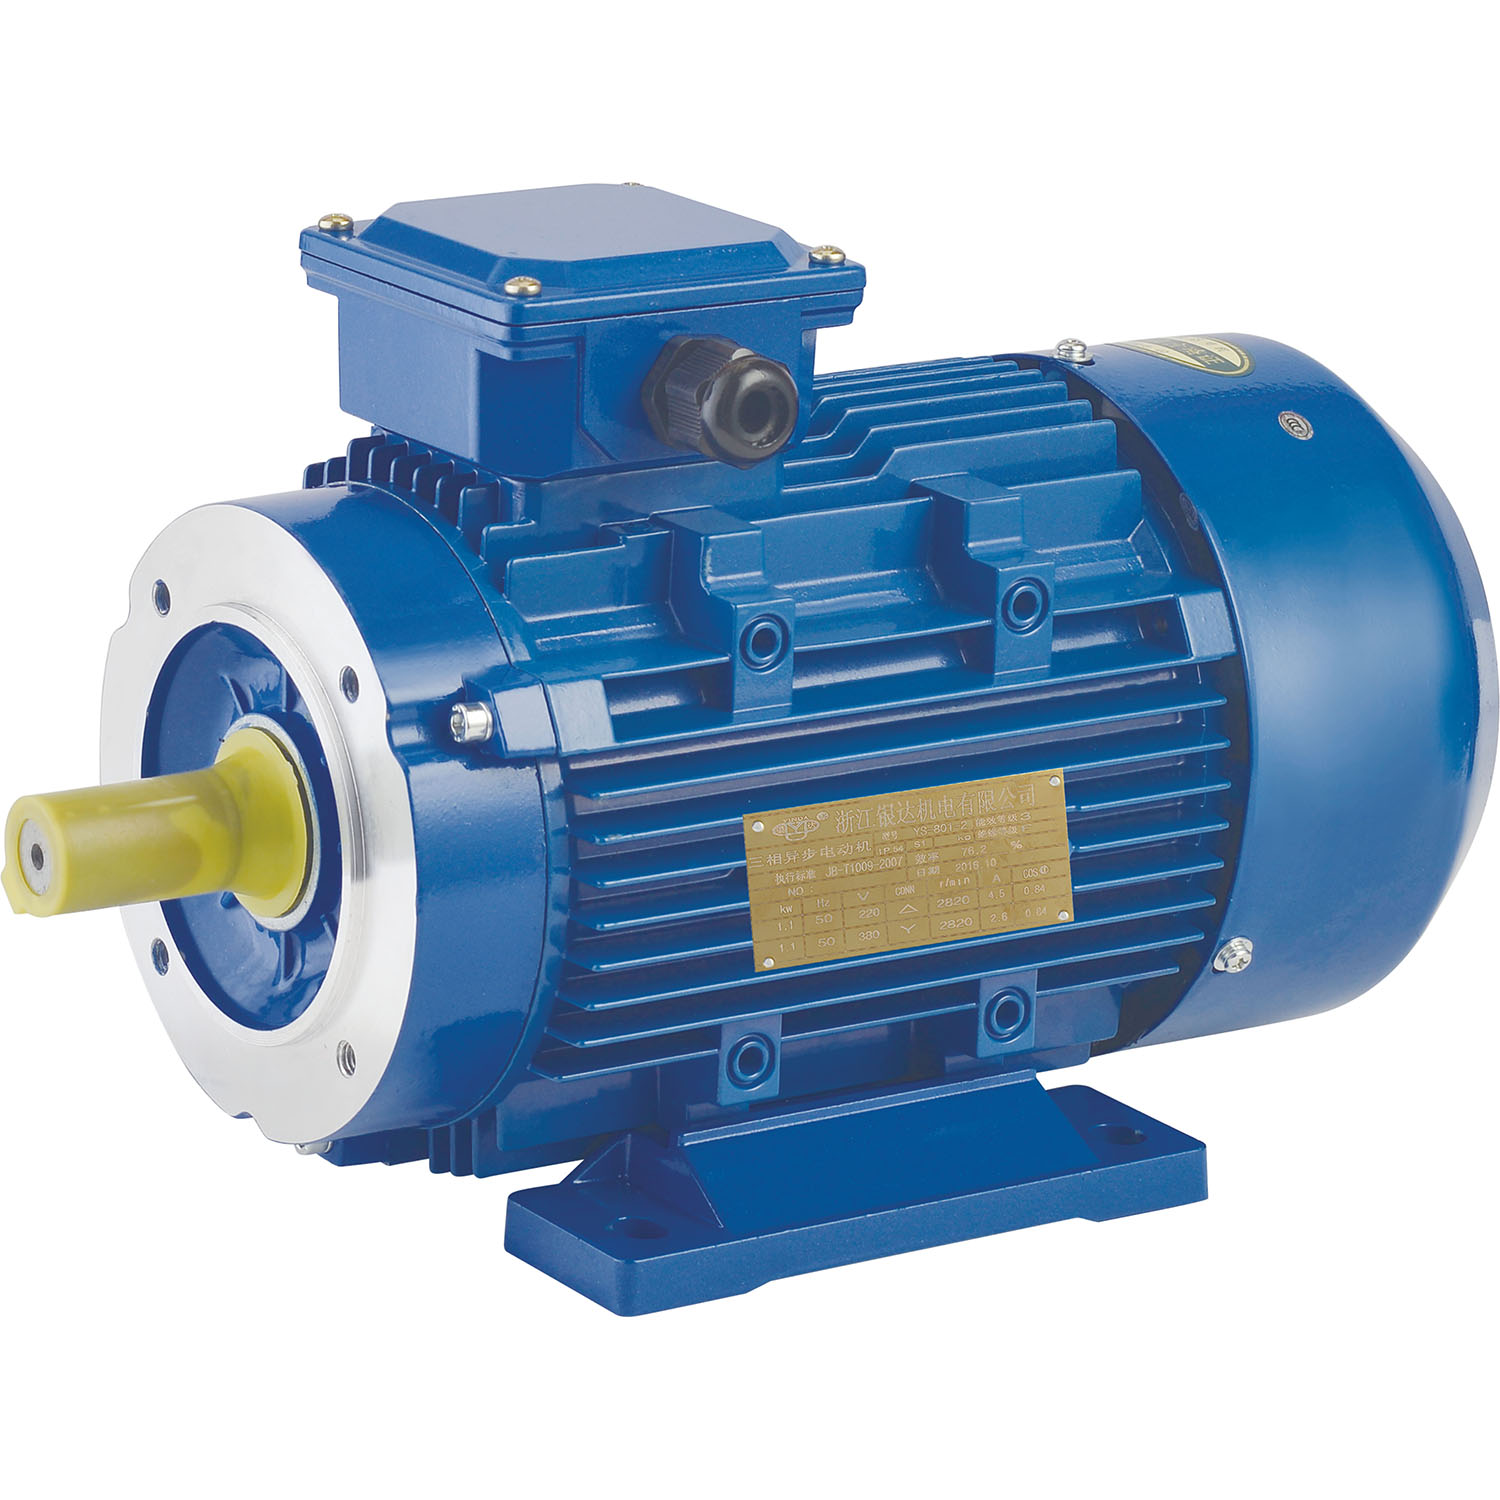 YS-80M2-4 0.75KW 1HP aluminum cylinder series high efficiency three-phase asynchronous motor